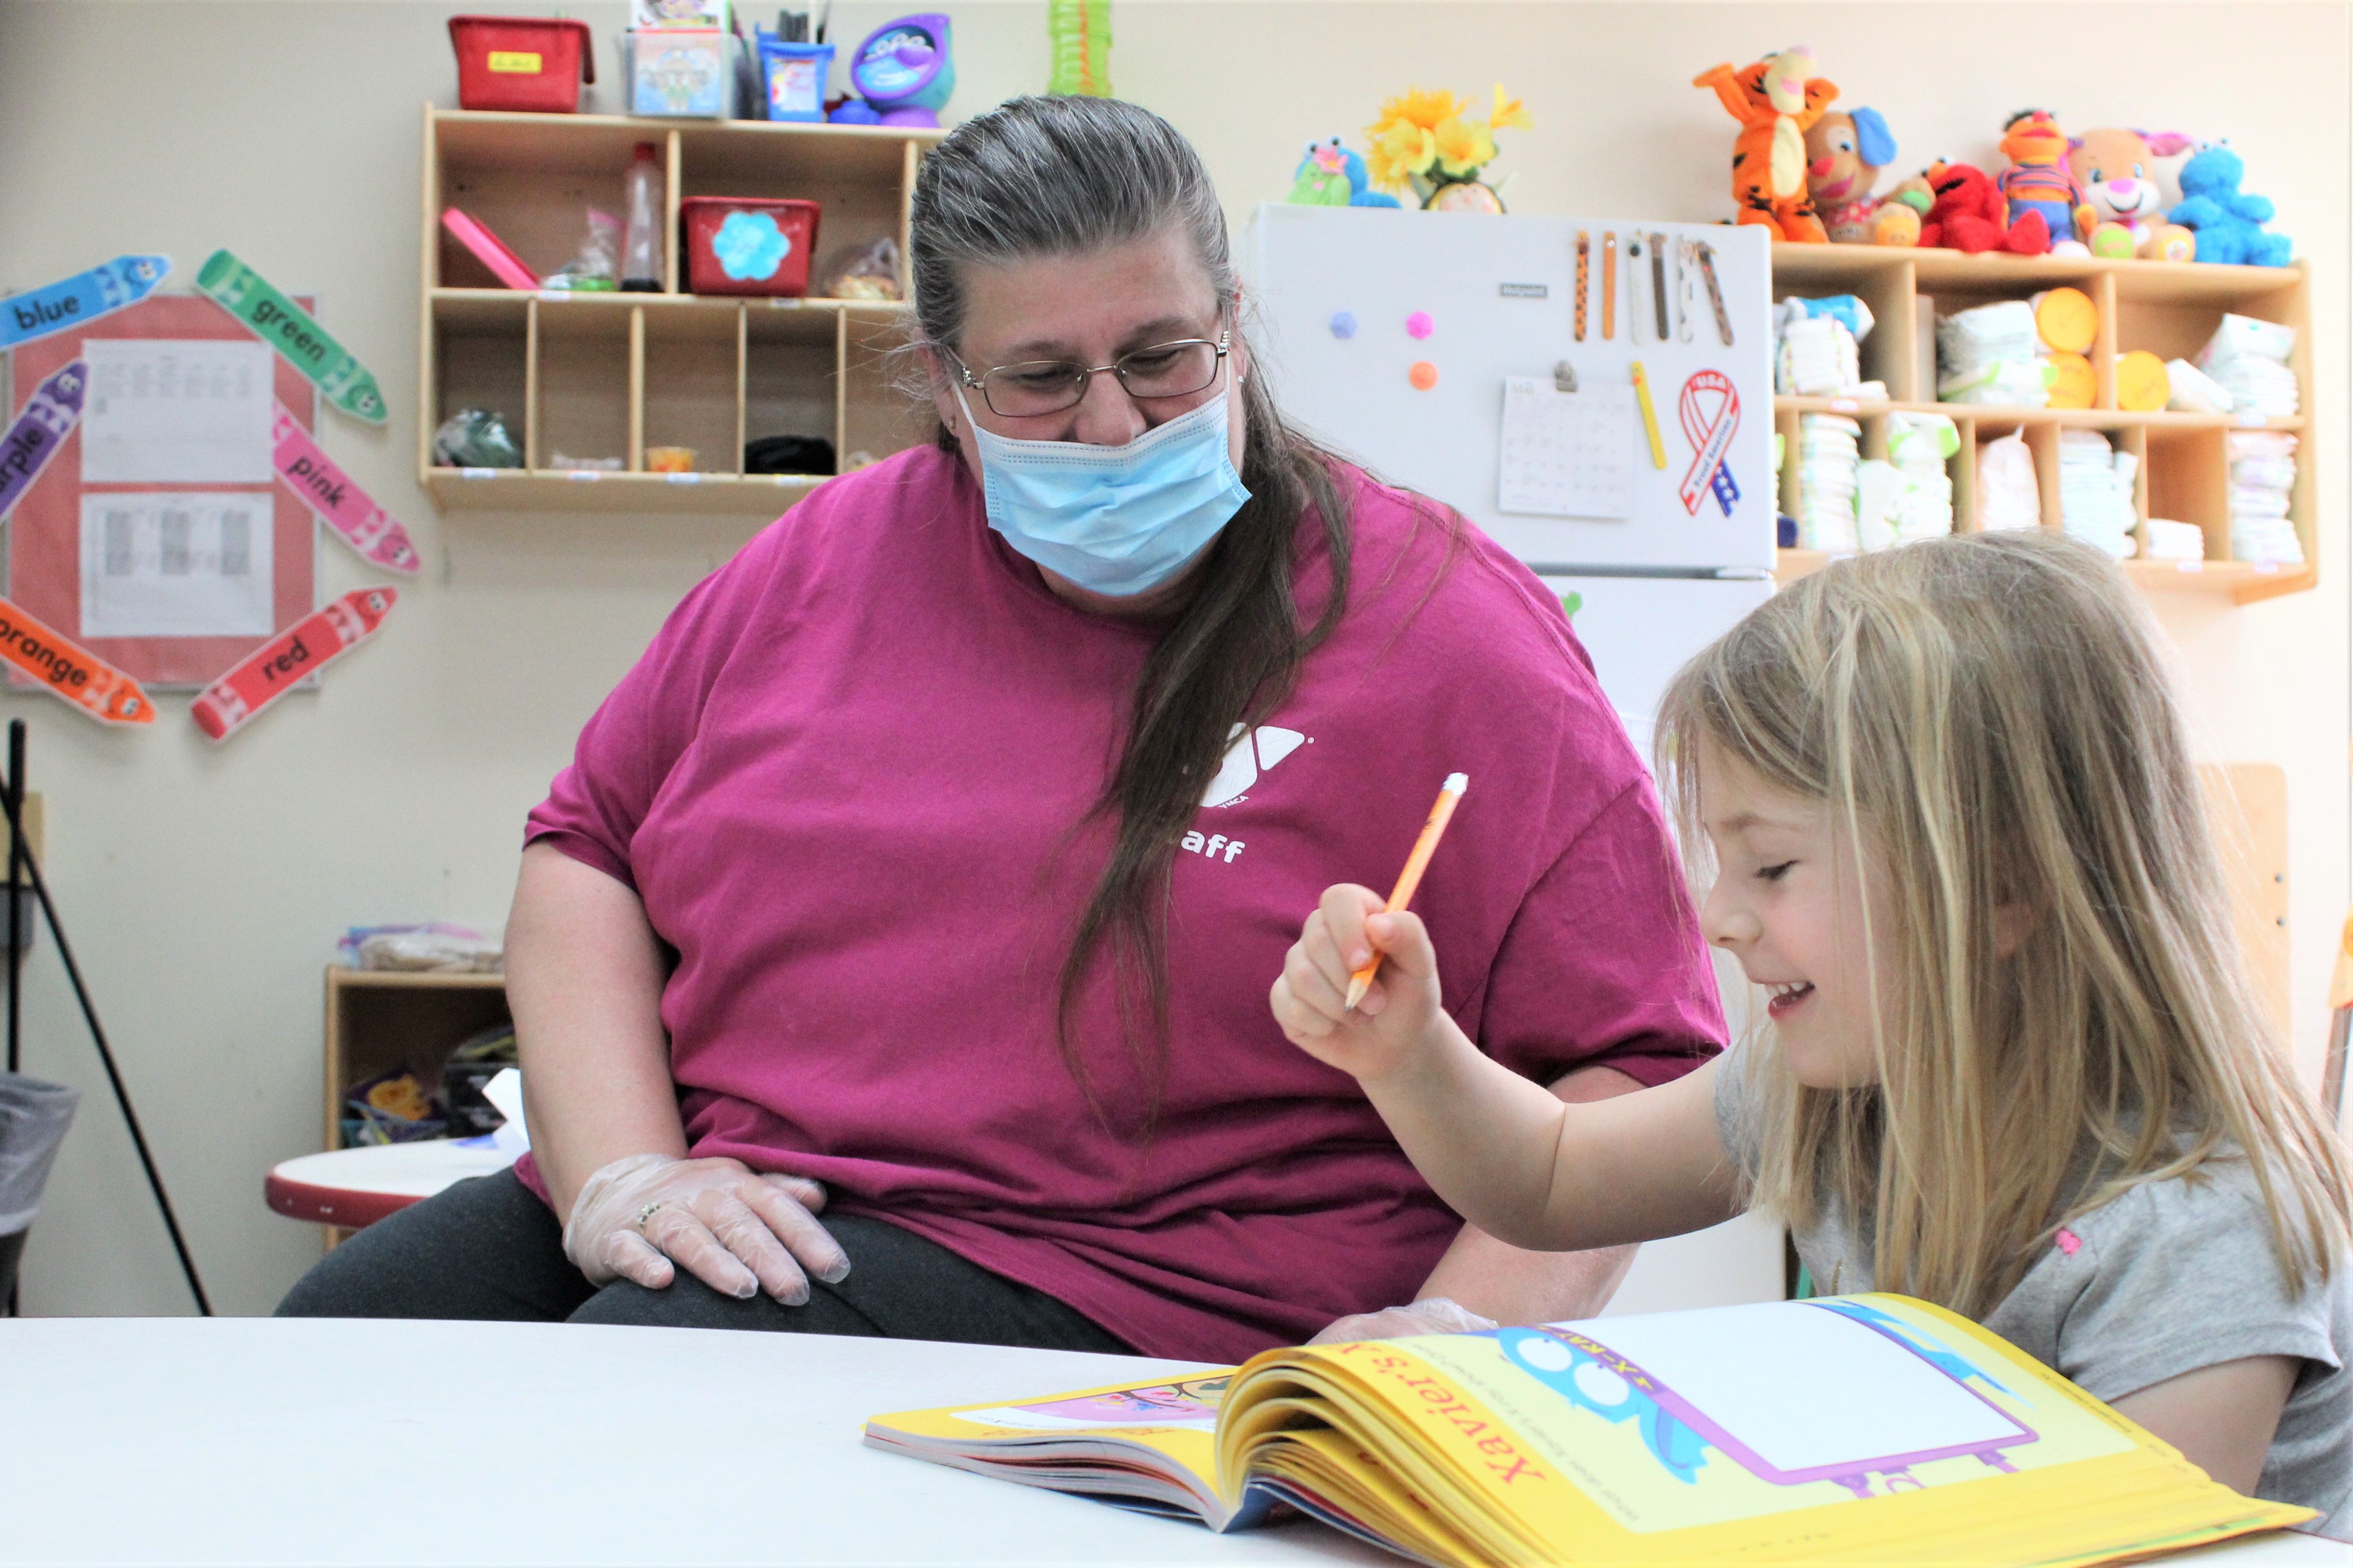 YMCA childcare provider Darlene Mount wears a mask and gloves to keep children safe amid the 2020 coronavirus pandemic (Courtesy of Andrea Plaza)